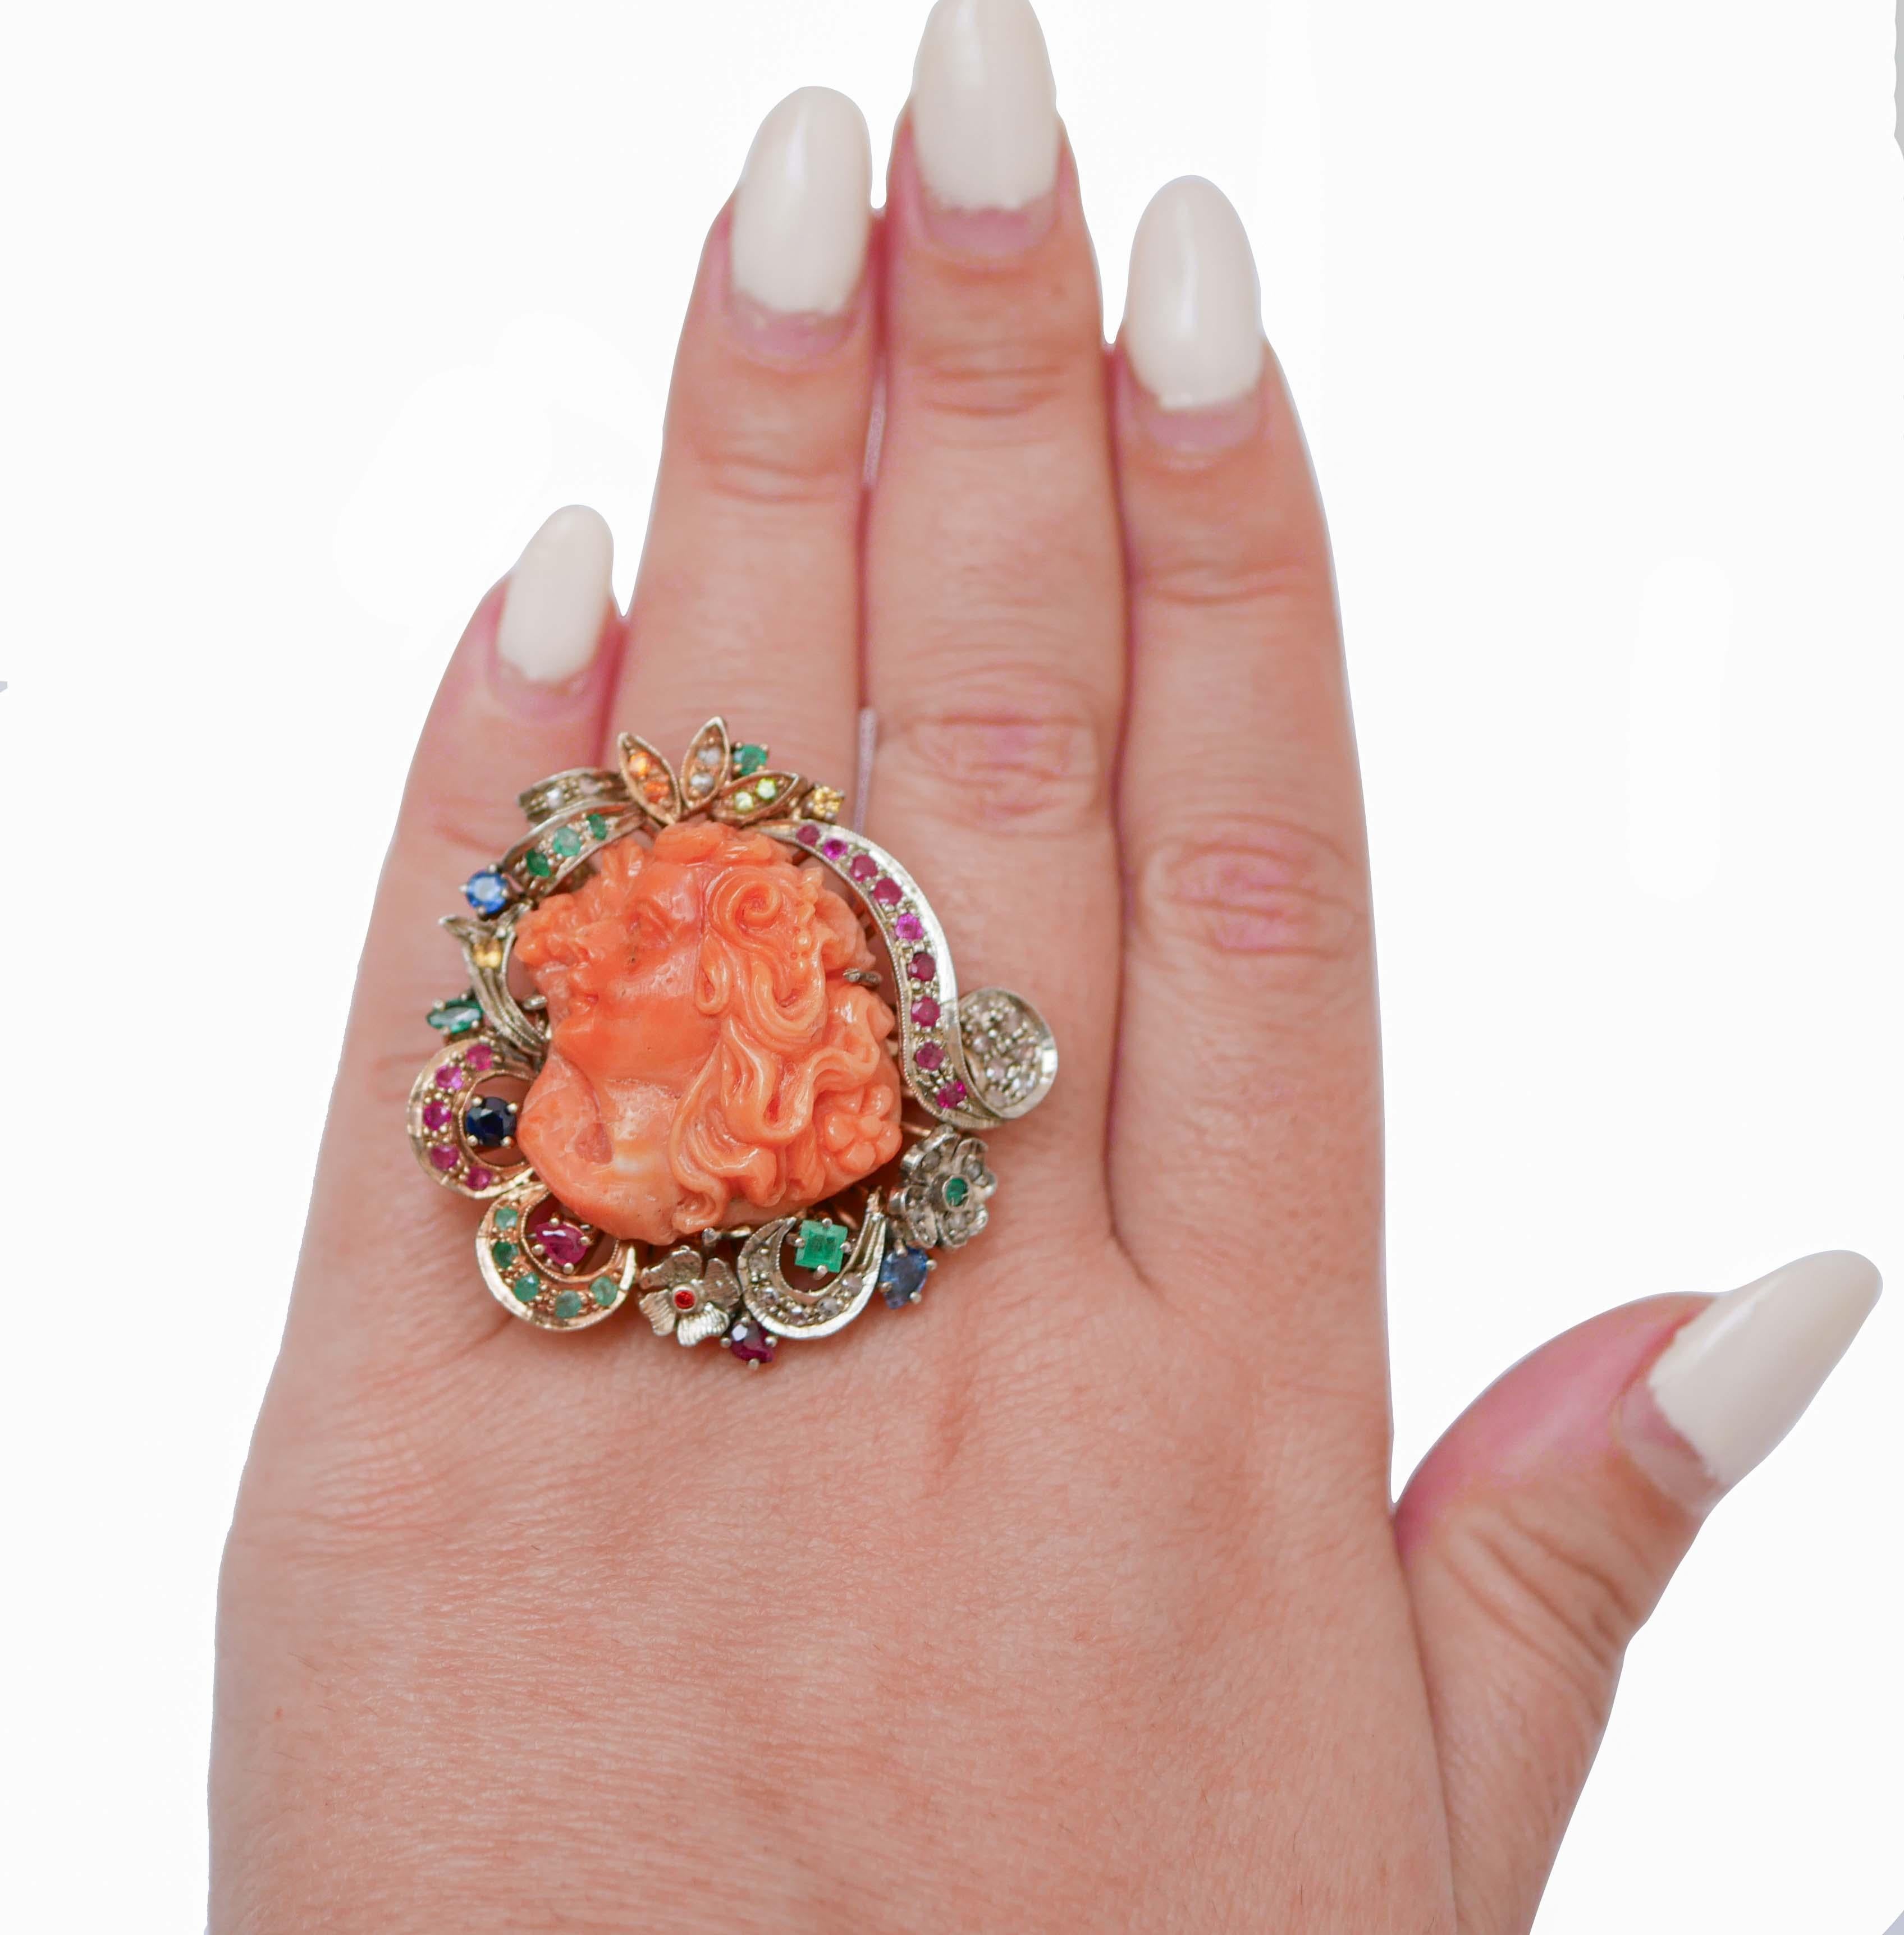 Mixed Cut Coral, Emeralds, Rubies, Sapphires, Diamonds, Rose Gold and Silver Ring. For Sale